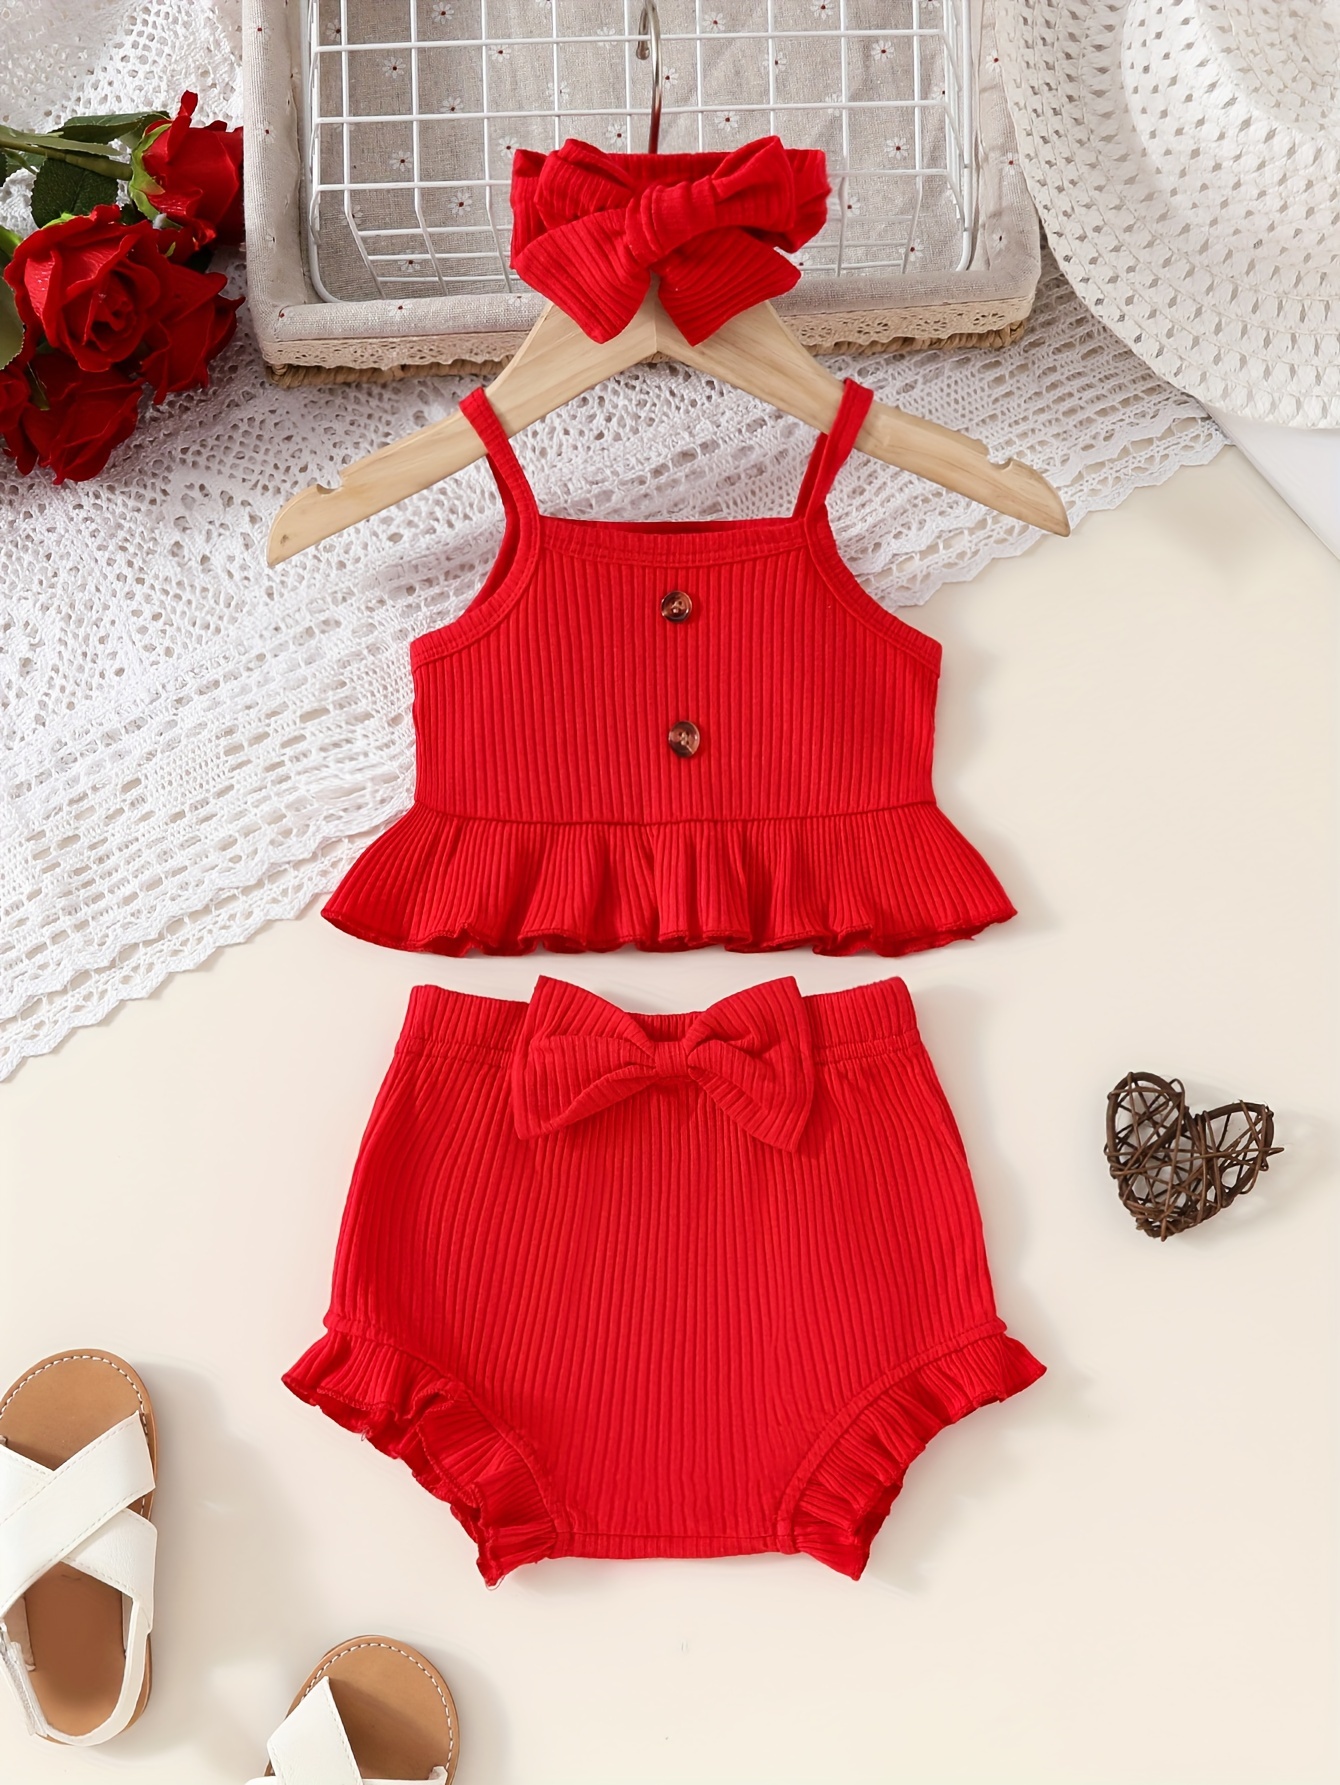 100% Cotton 2pcs Baby Girl Eyelet Embroidered Ruffle Trim Flutter-sleeve Top and Bow Front Shorts Set